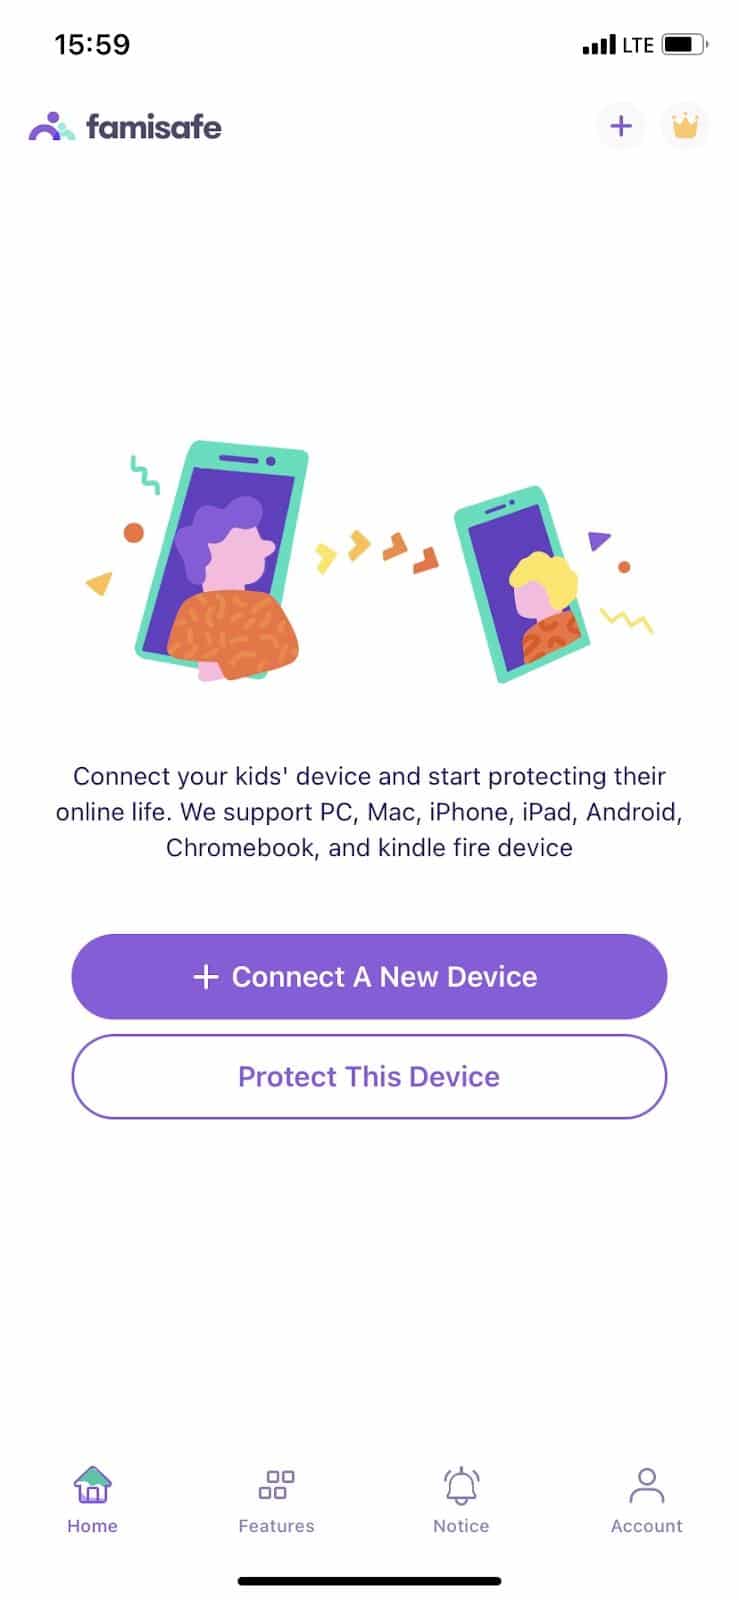 famisafe connect a new device